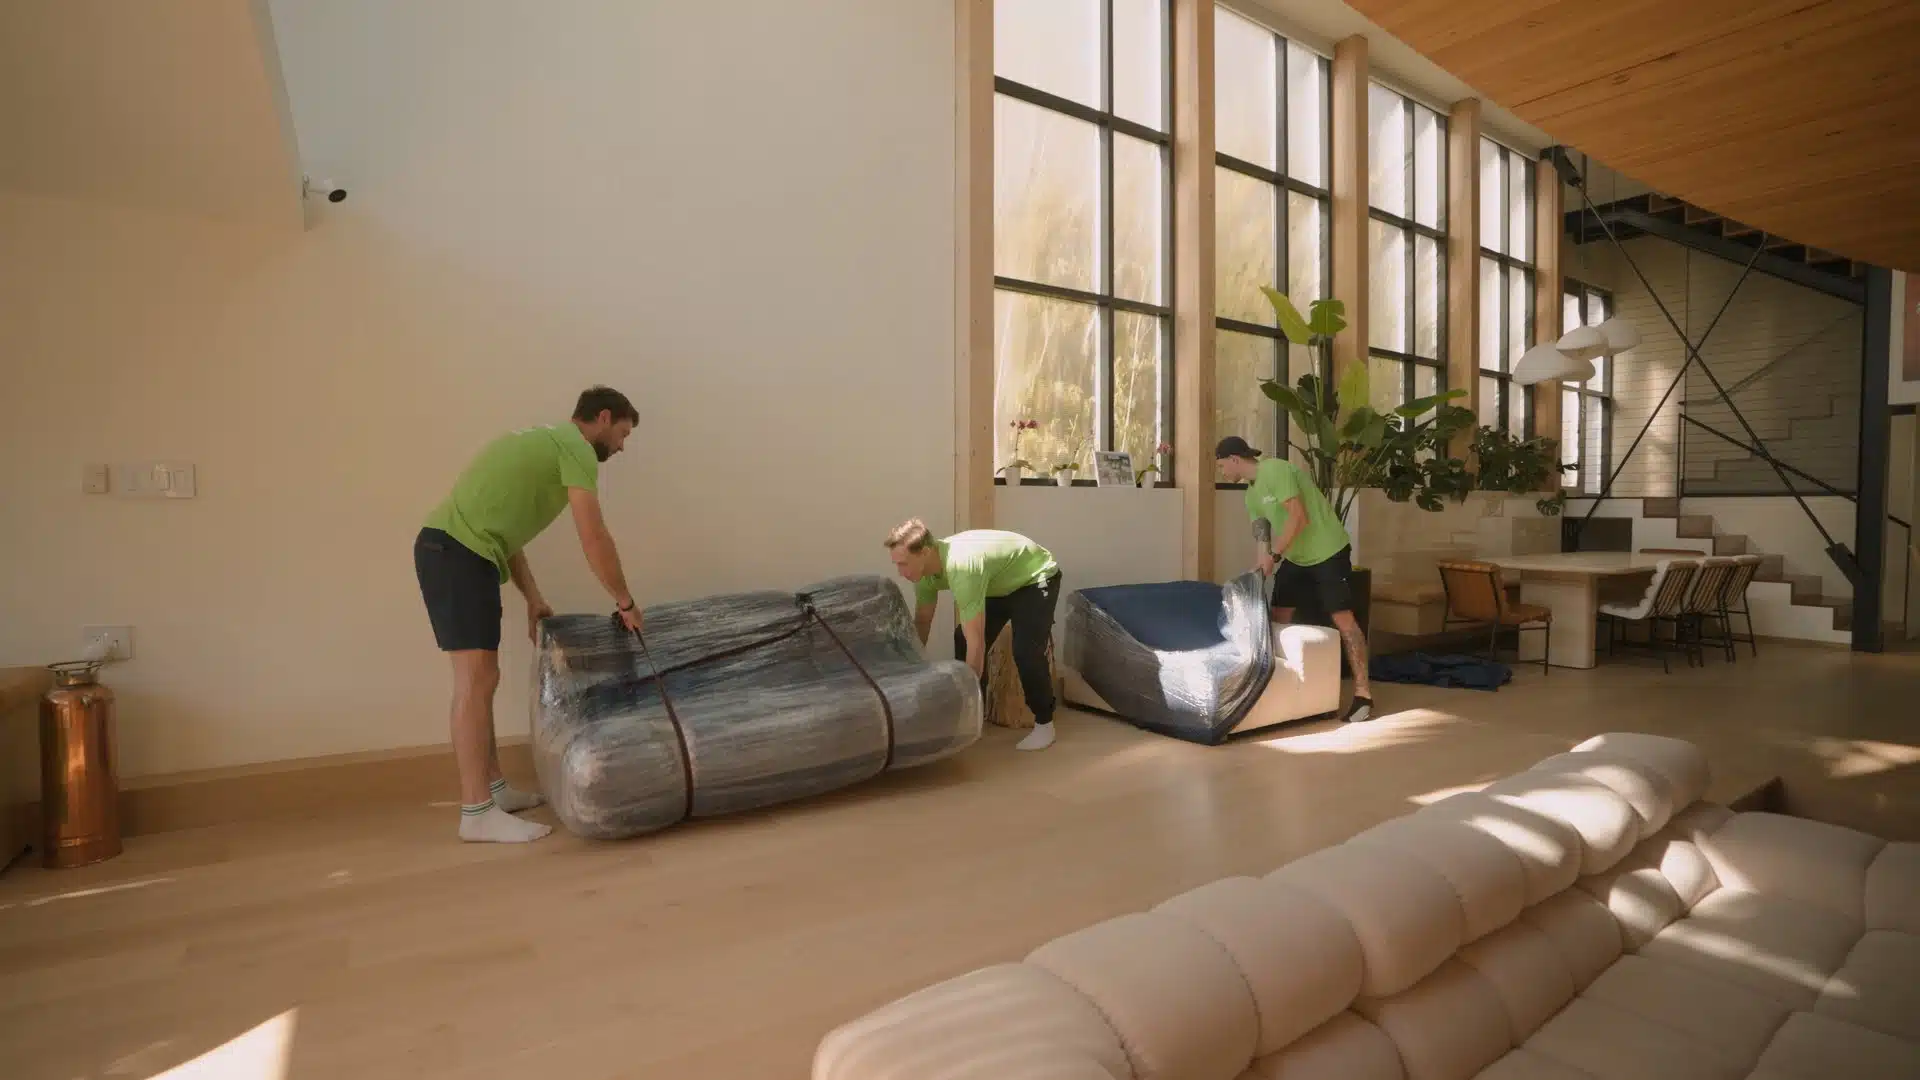 Three people in green shirts are moving wrapped furniture in a bright living room with large windows and a leather couch, carefully following their packing checklist.